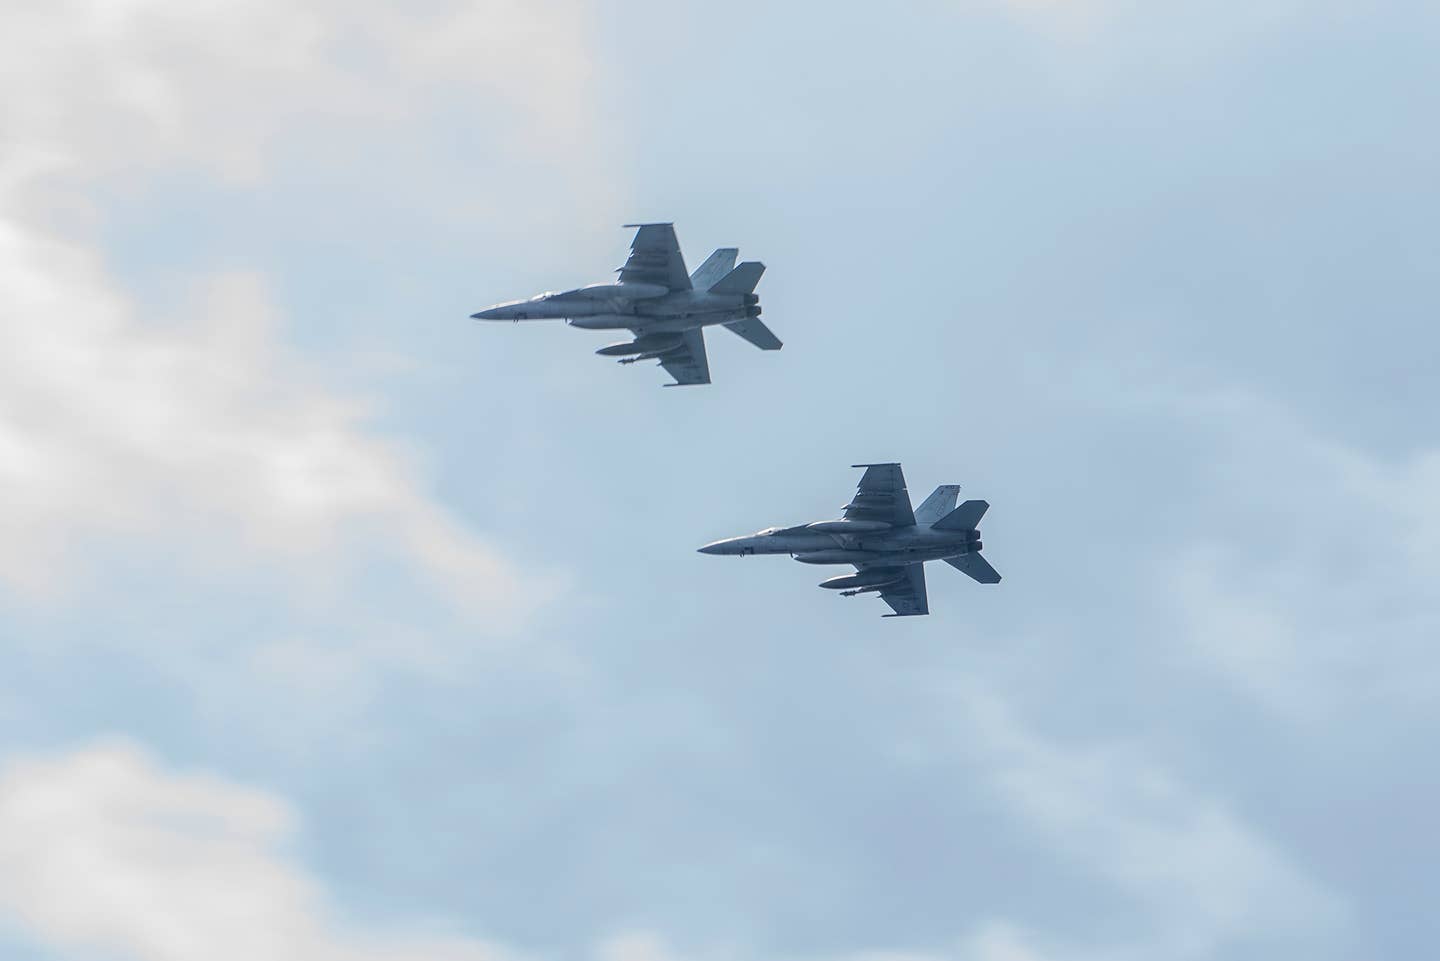 F/A-18E Super Hornets, assigned to the "Fist of the Fleet" of Strike Fighter Squadron (VFA) 25, fly over the flight deck of aircraft carrier USS Harry S. Truman (CVN 75). (U.S. Navy photo by Mass Communication Specialist 3rd Class Anthony Flynn/Released)